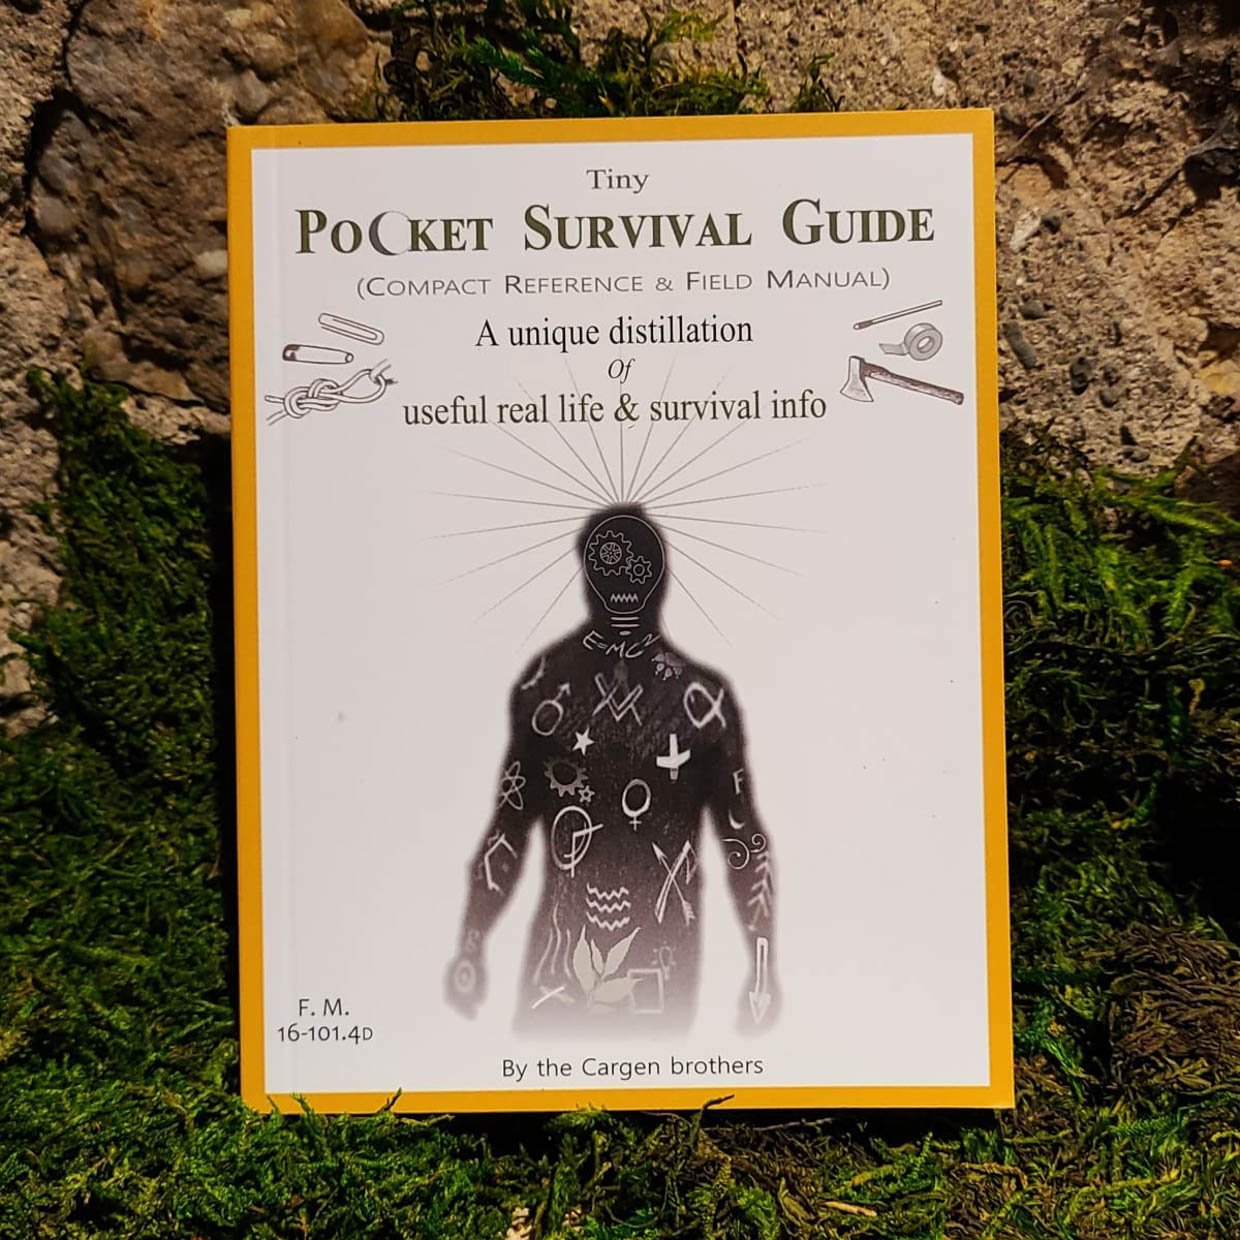 The Tiny Pocket Survival Guide